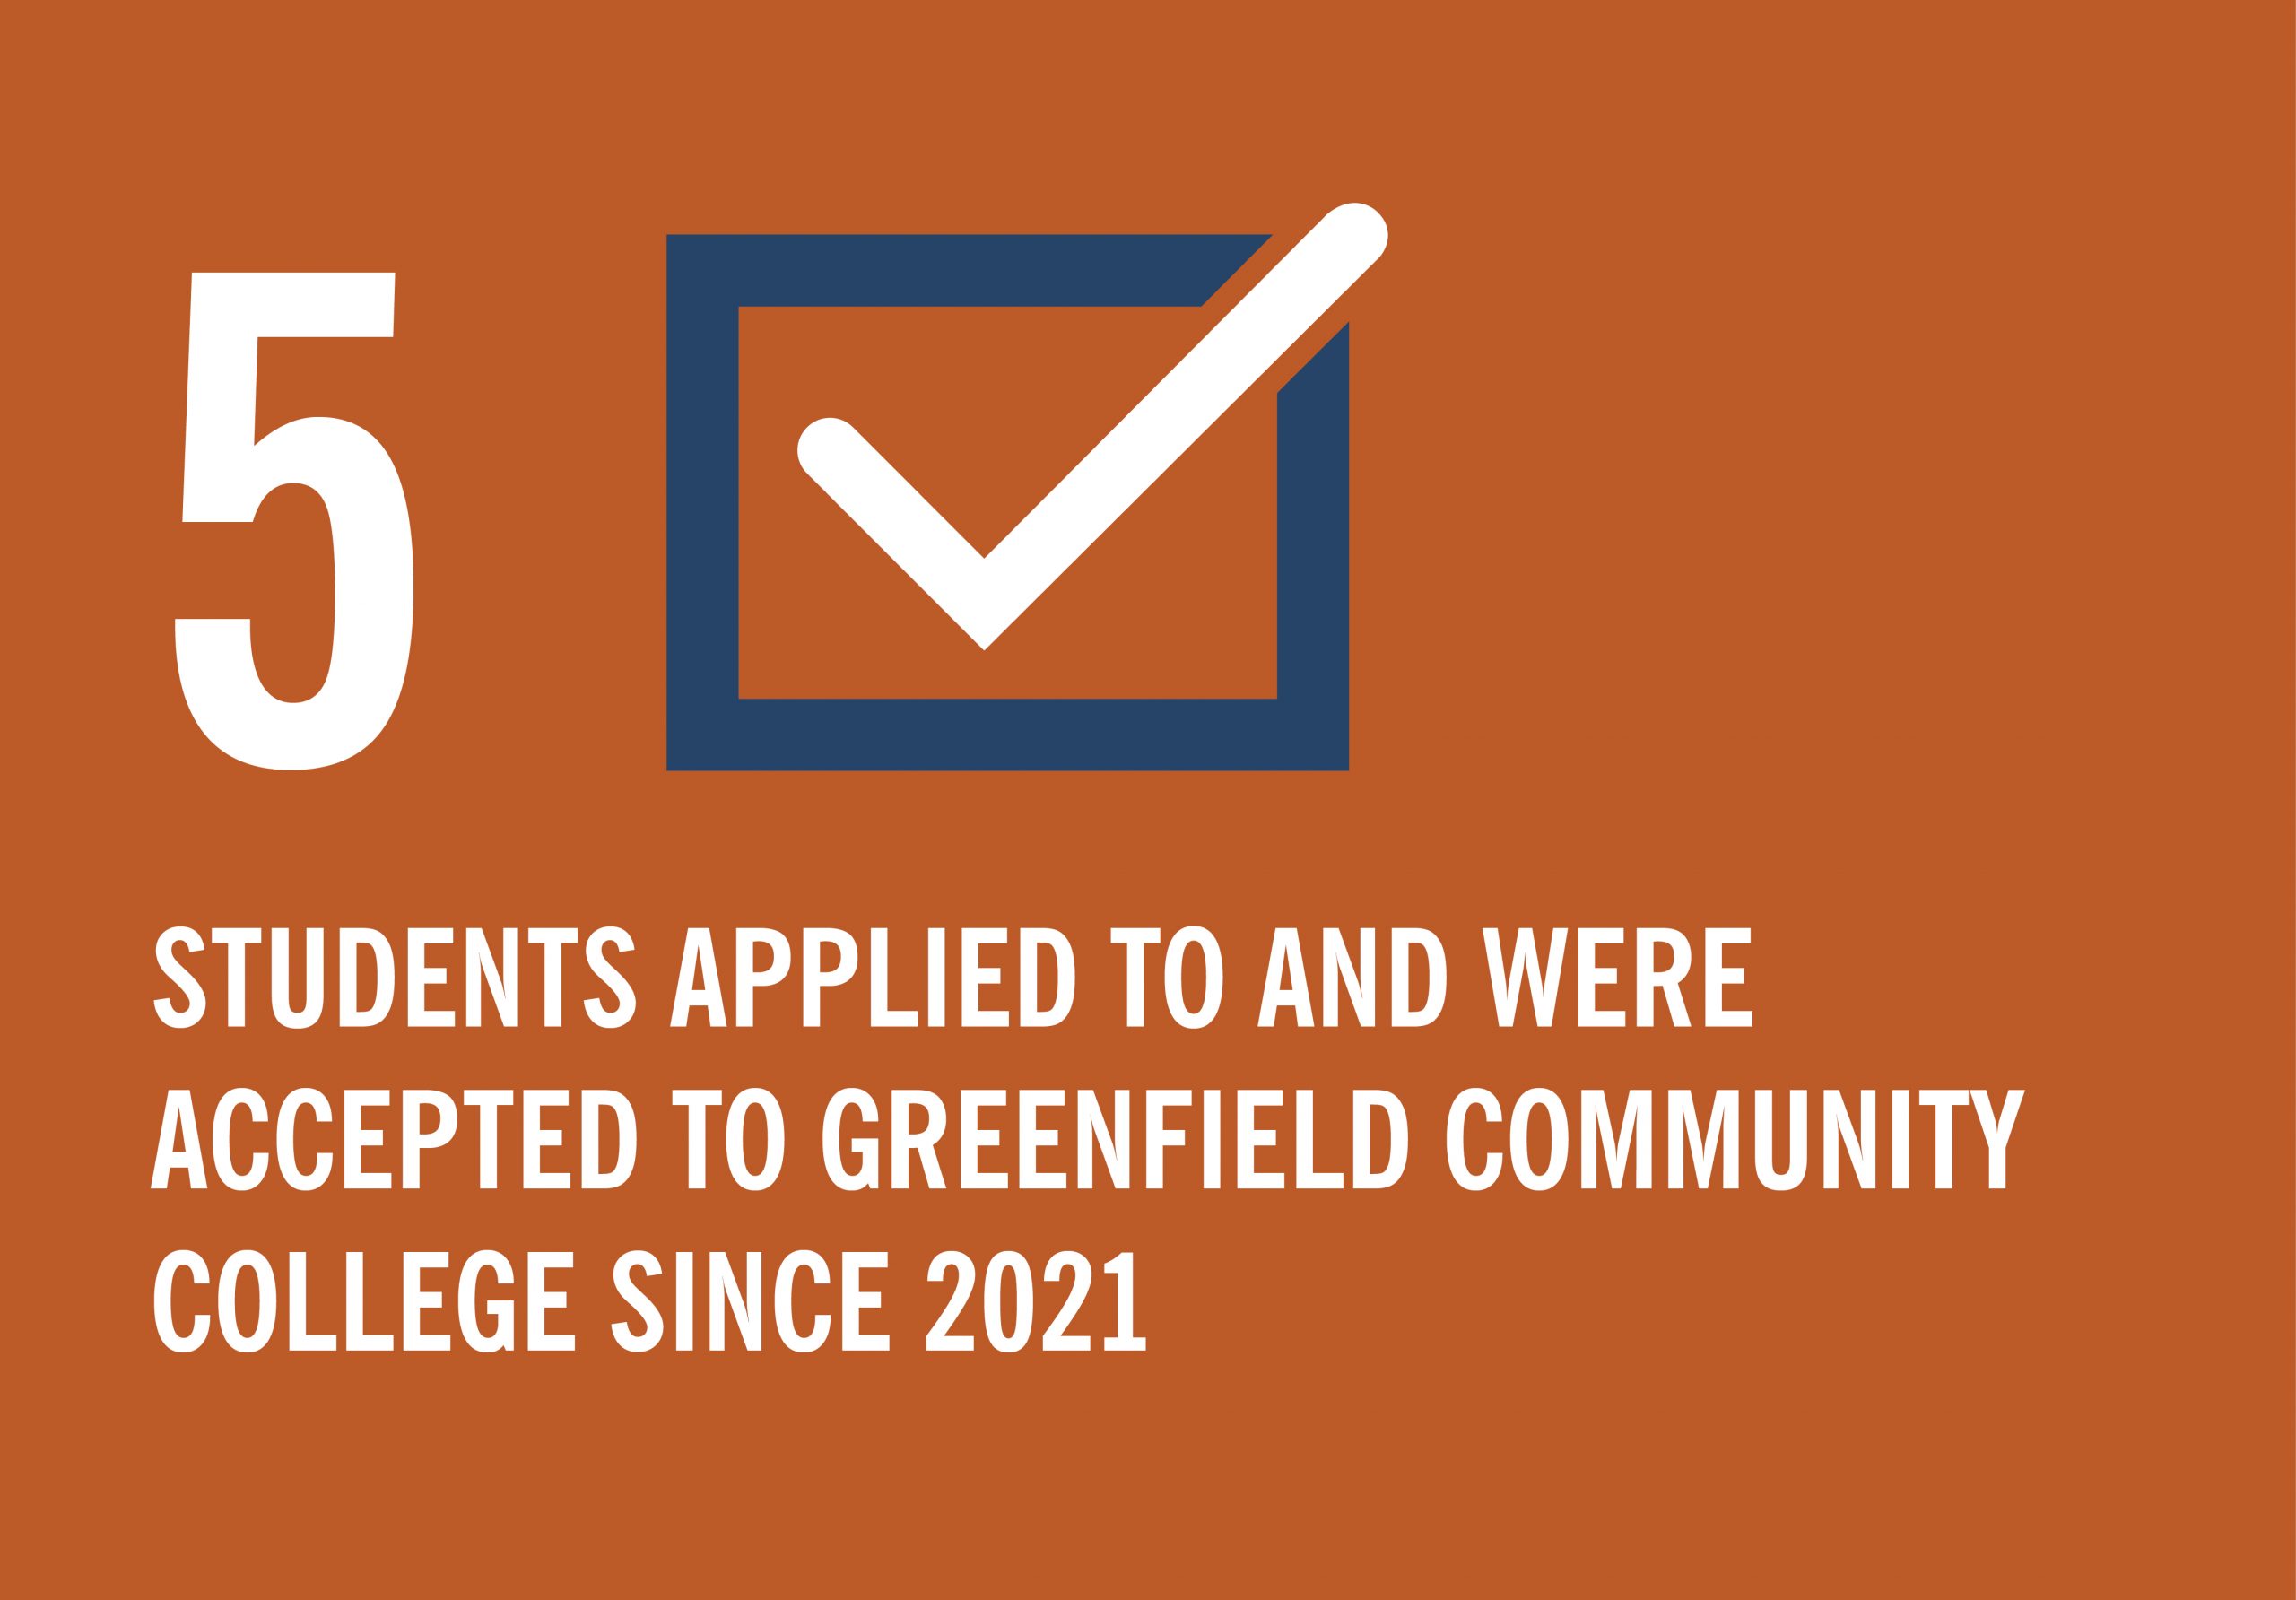 Graphic image of check mark and text that reads "5 students applied to and were accepted to Greenfield Community College since 2021."